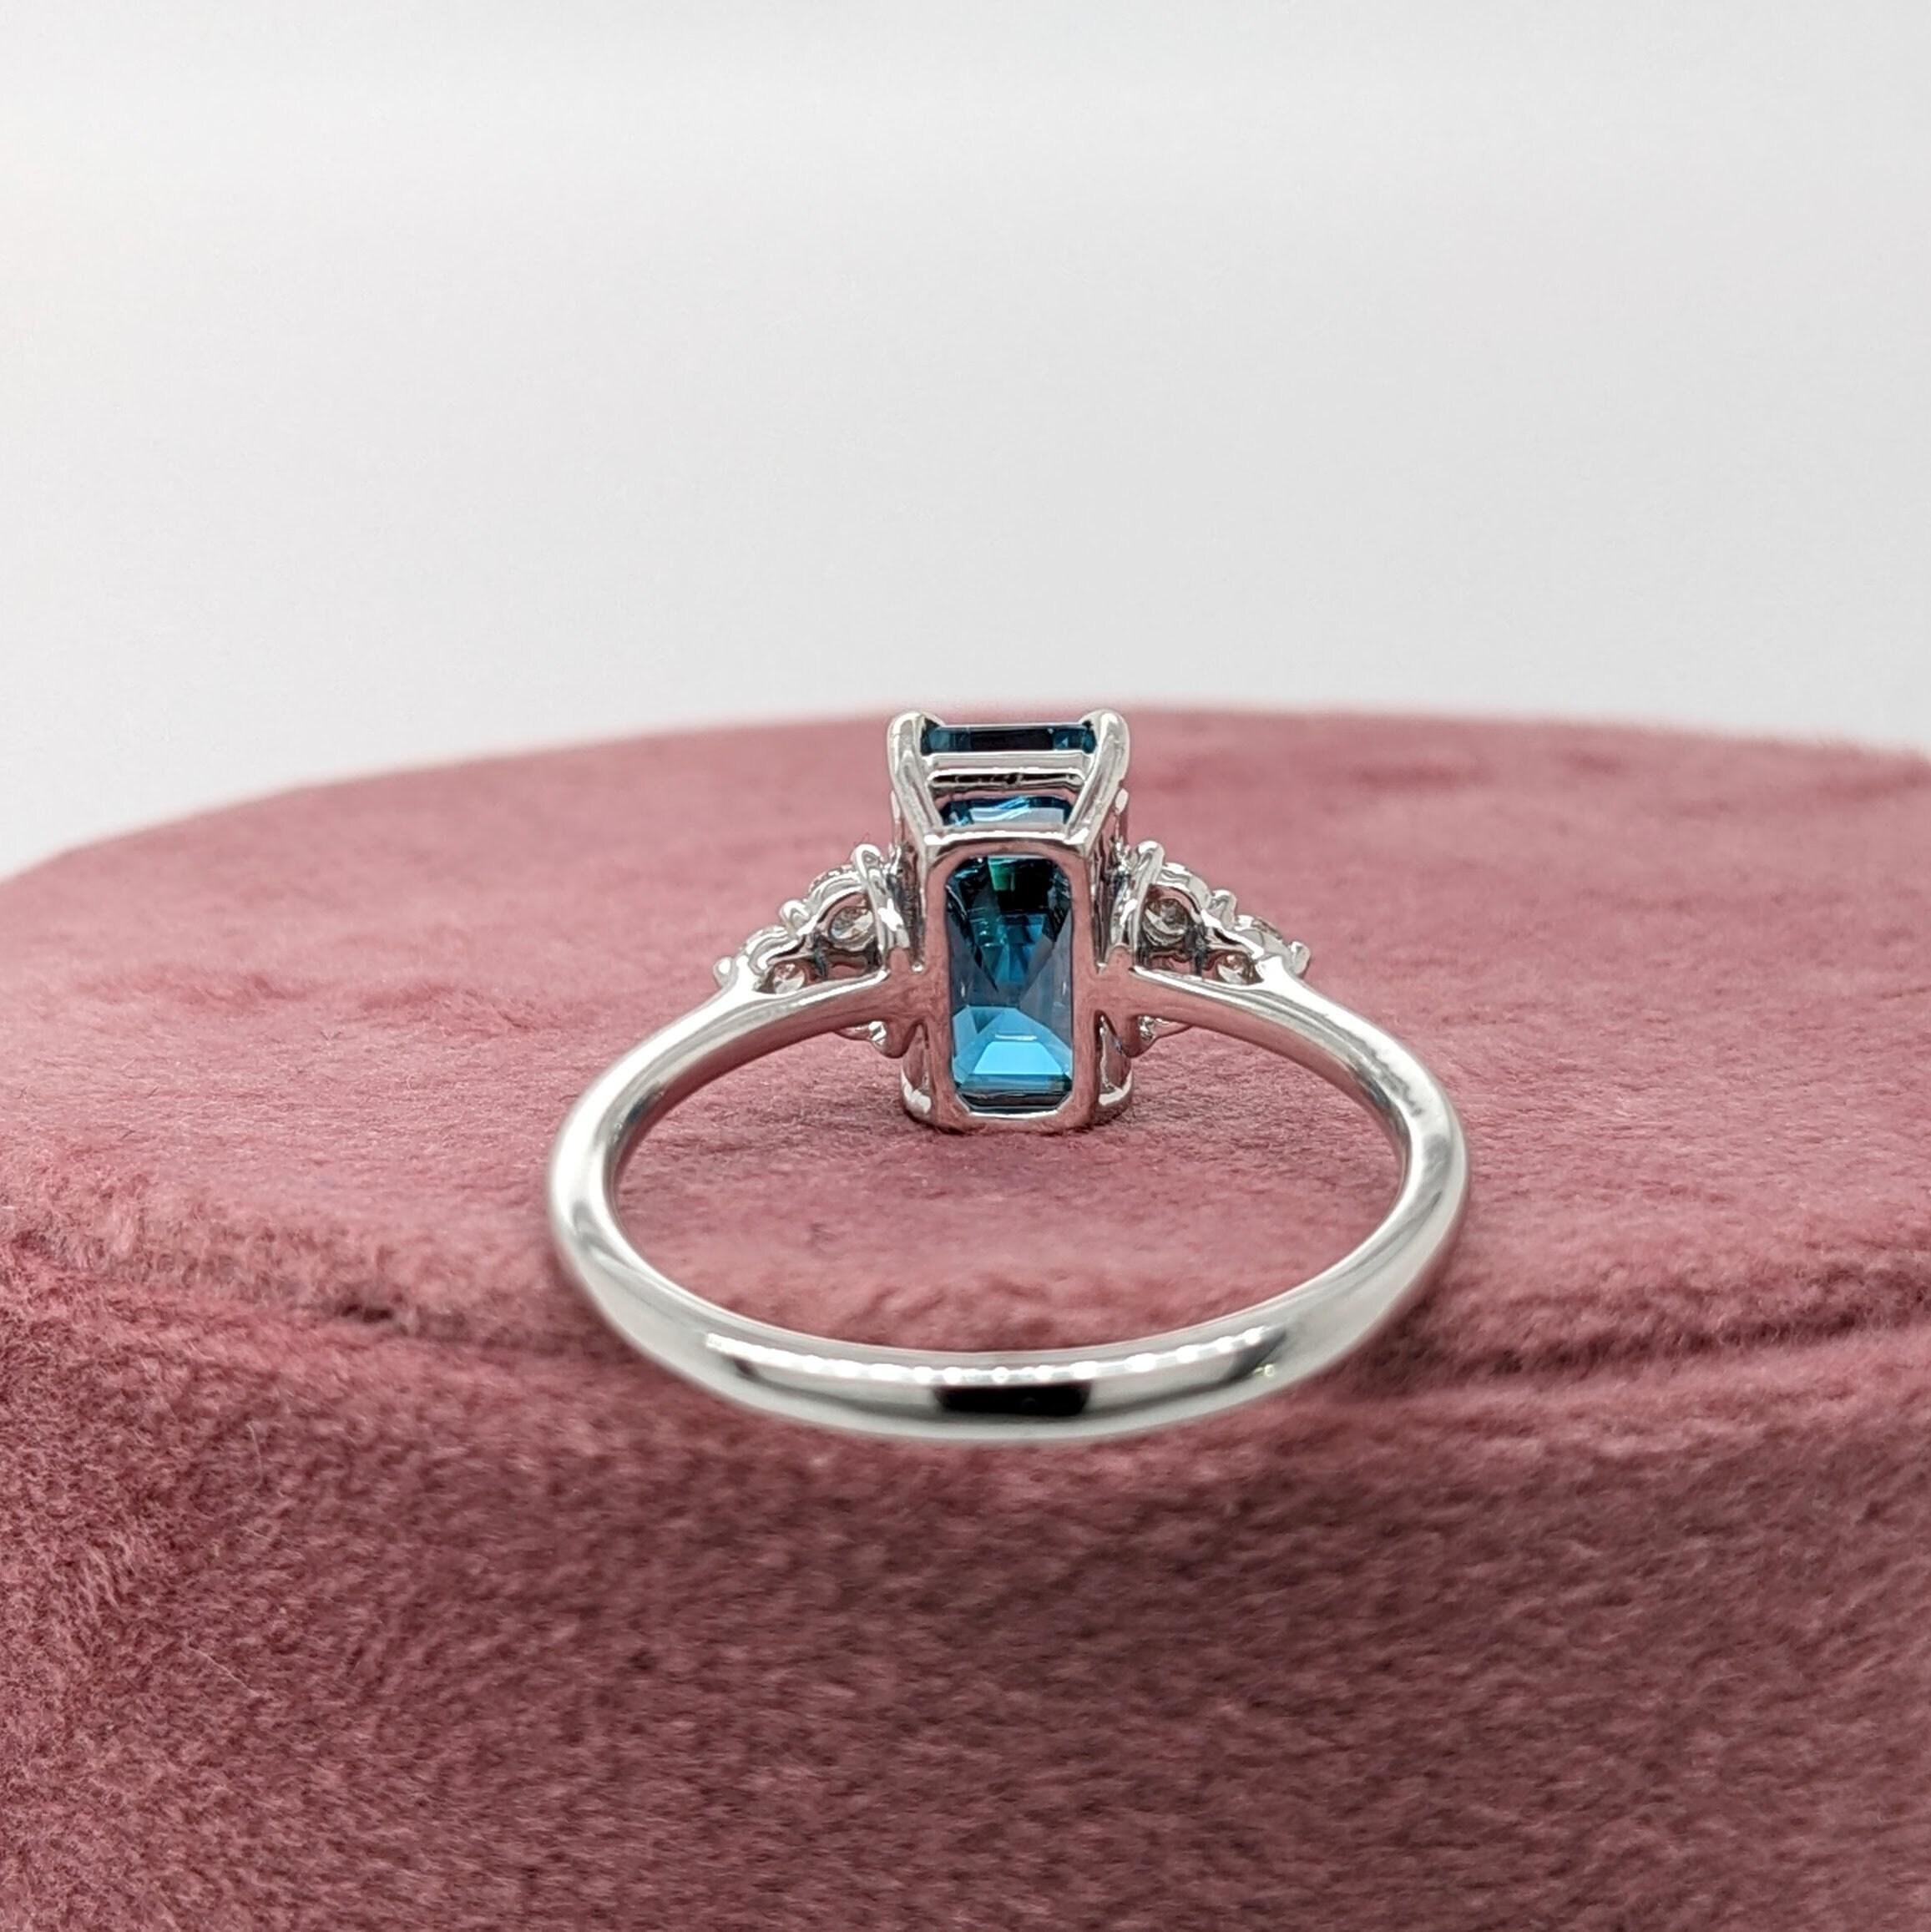 Modern 4.2ct Blue Zircon Ring w Earth Mined Diamonds in Solid 14K White Gold EM 9.5x6mm For Sale